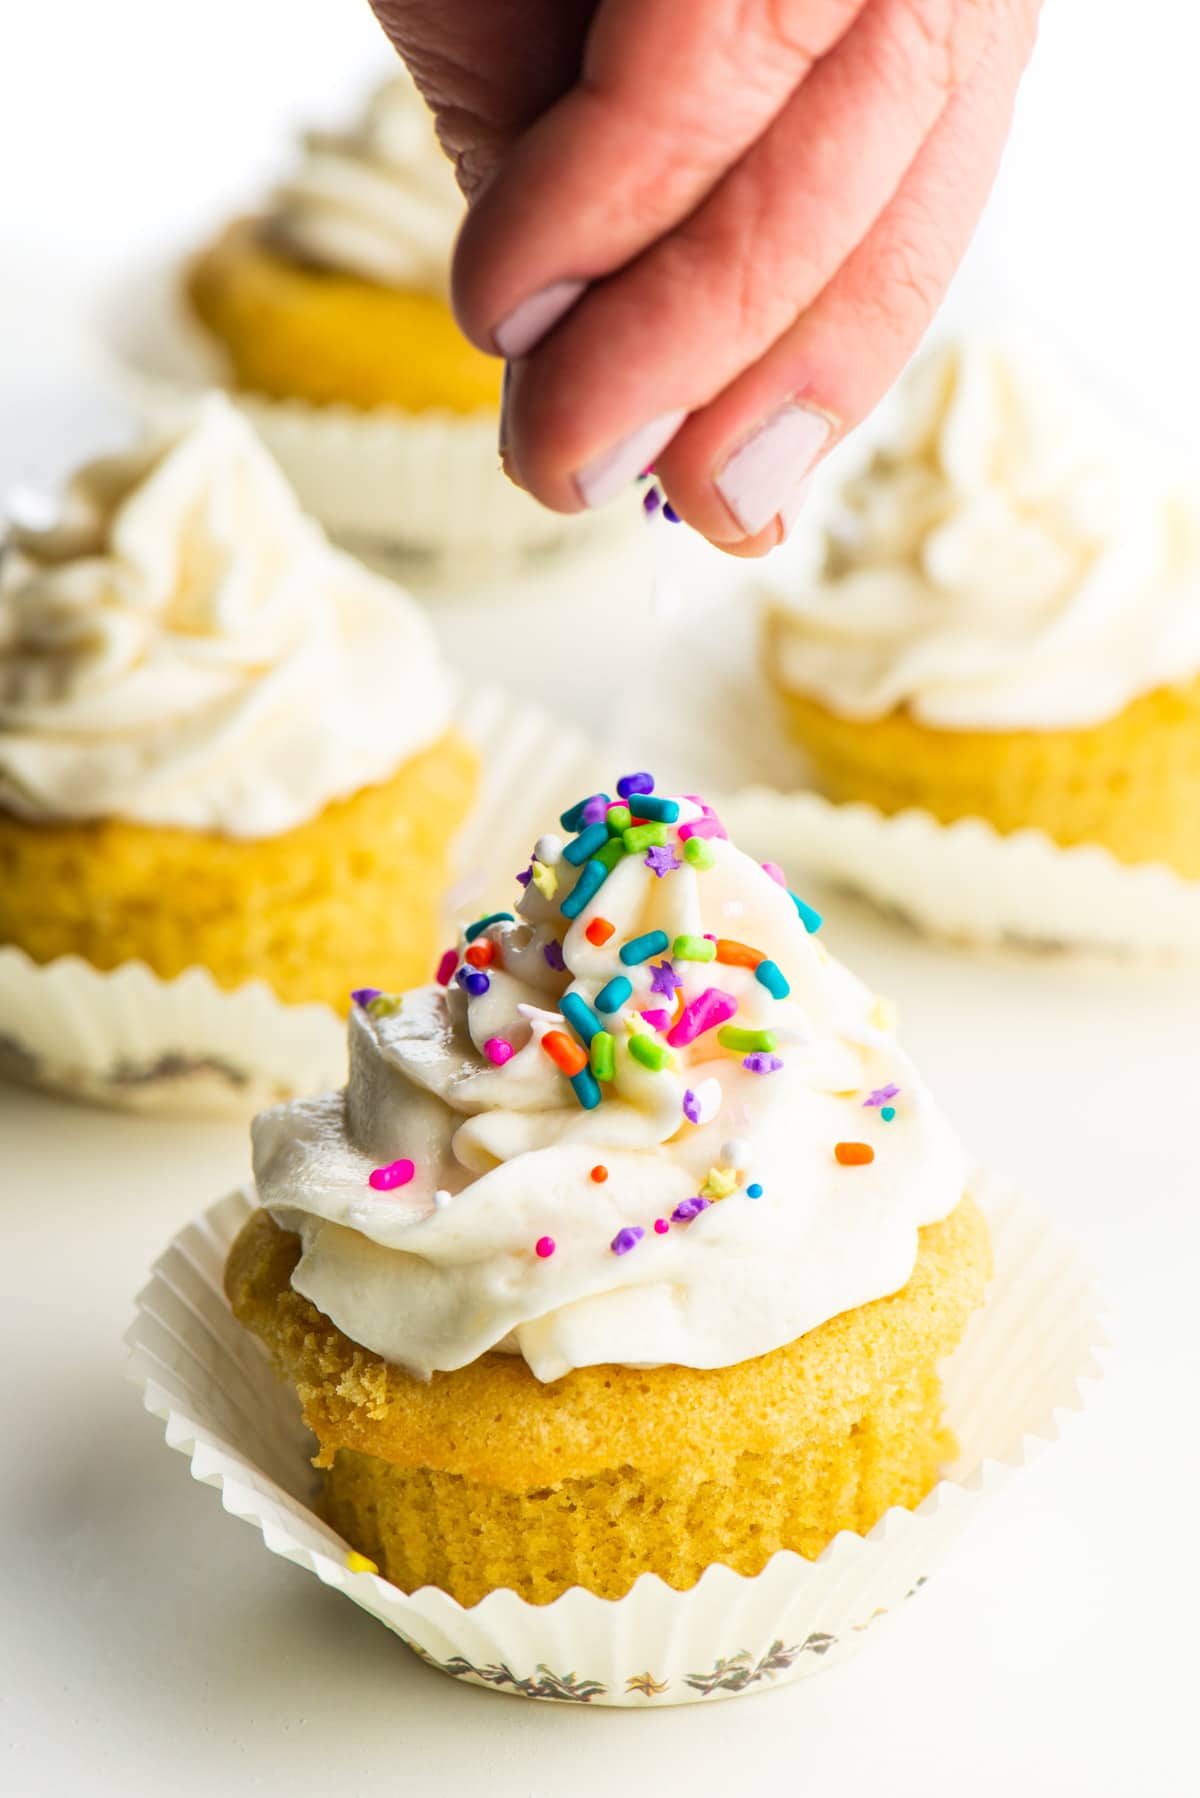 A hand hovers over a cupcake dropping sprinkles on it.